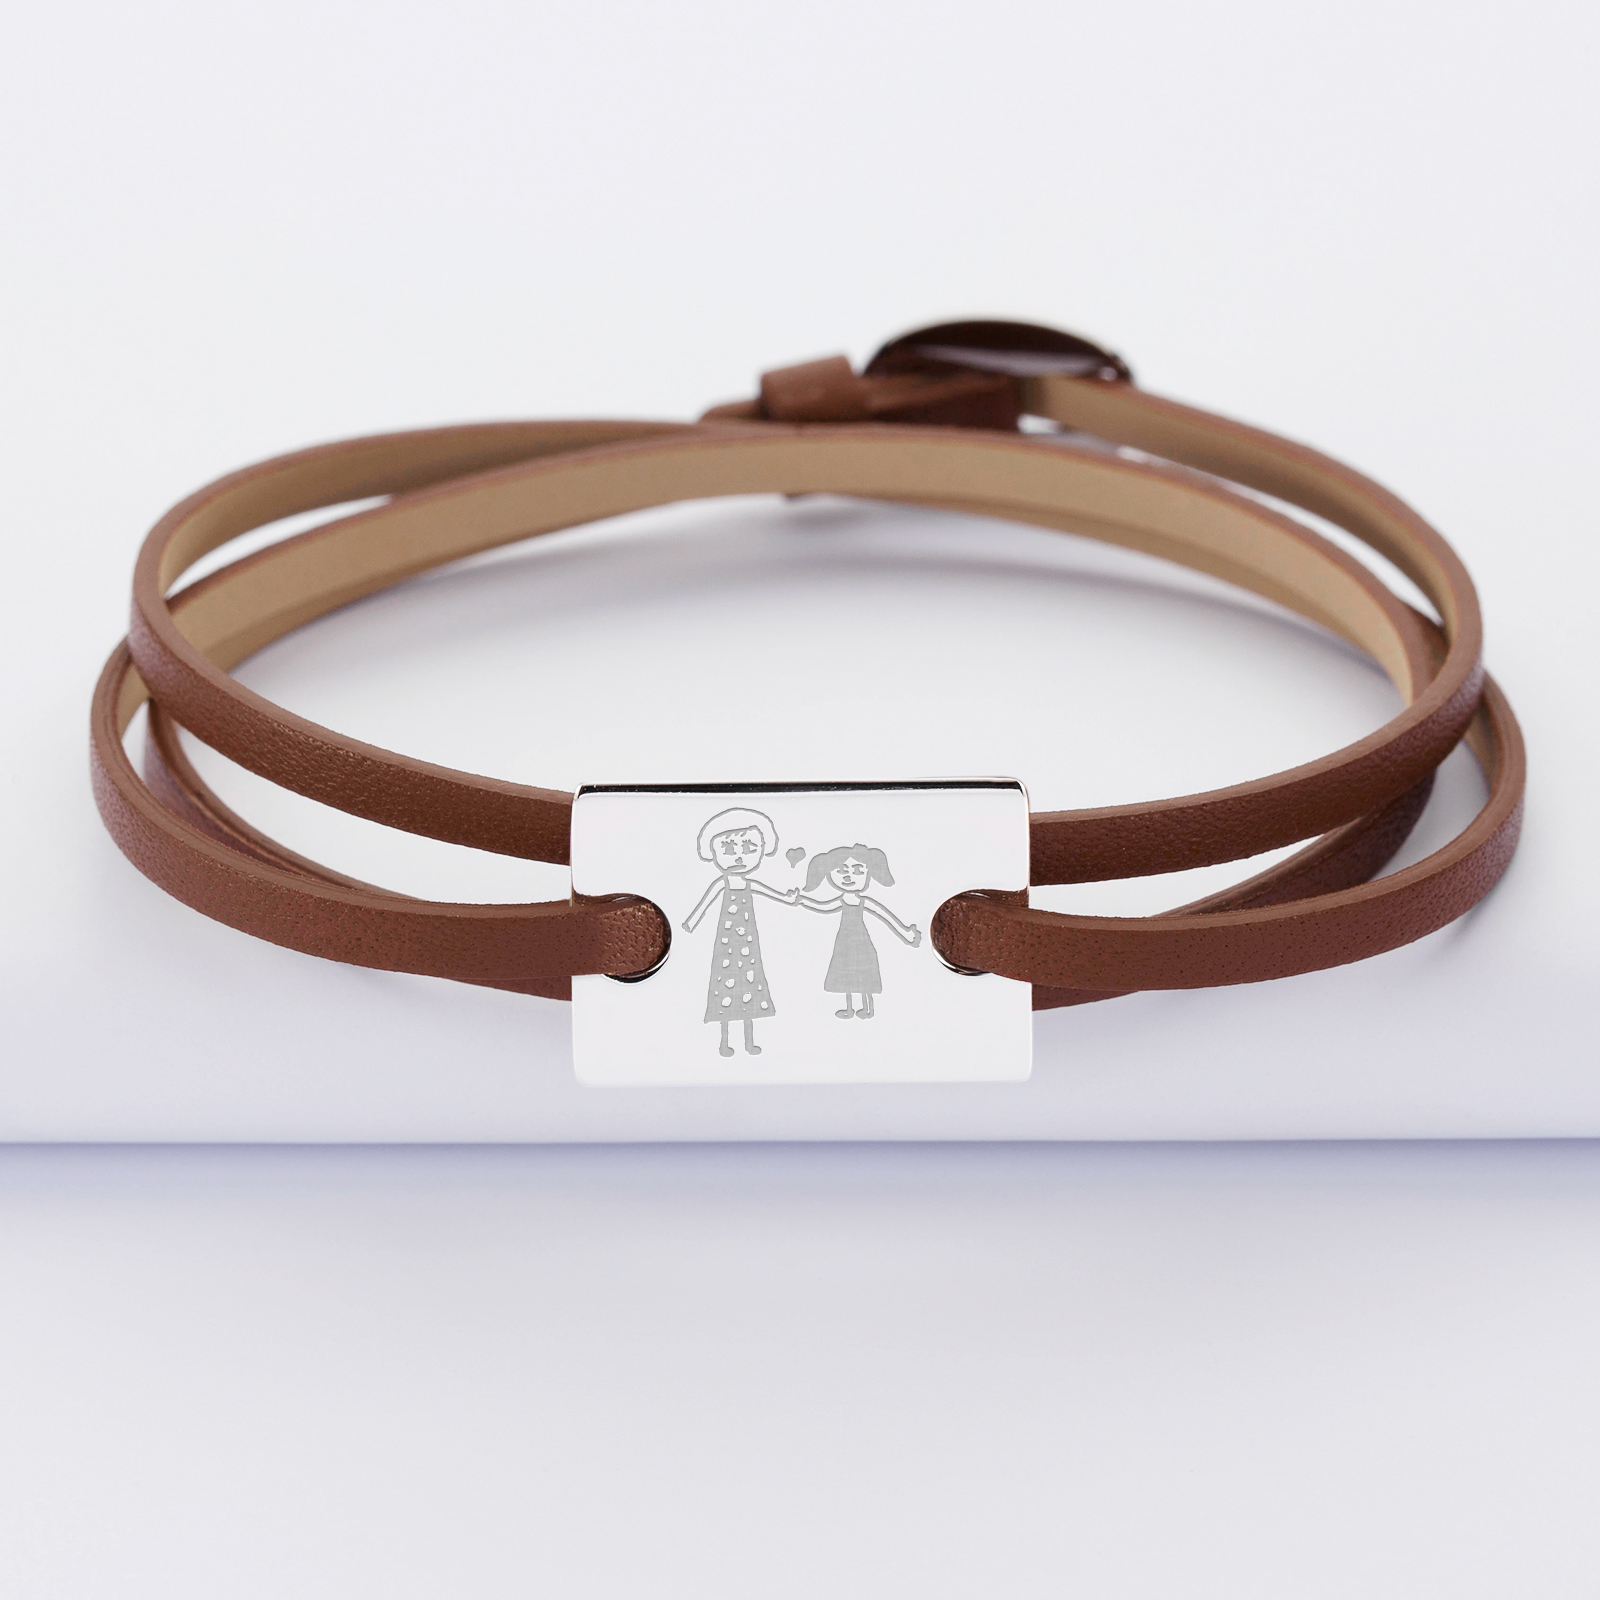 3 turn leather bracelet with personalised engraved rectangular 2-hole silver medallion 23x16mm sketch